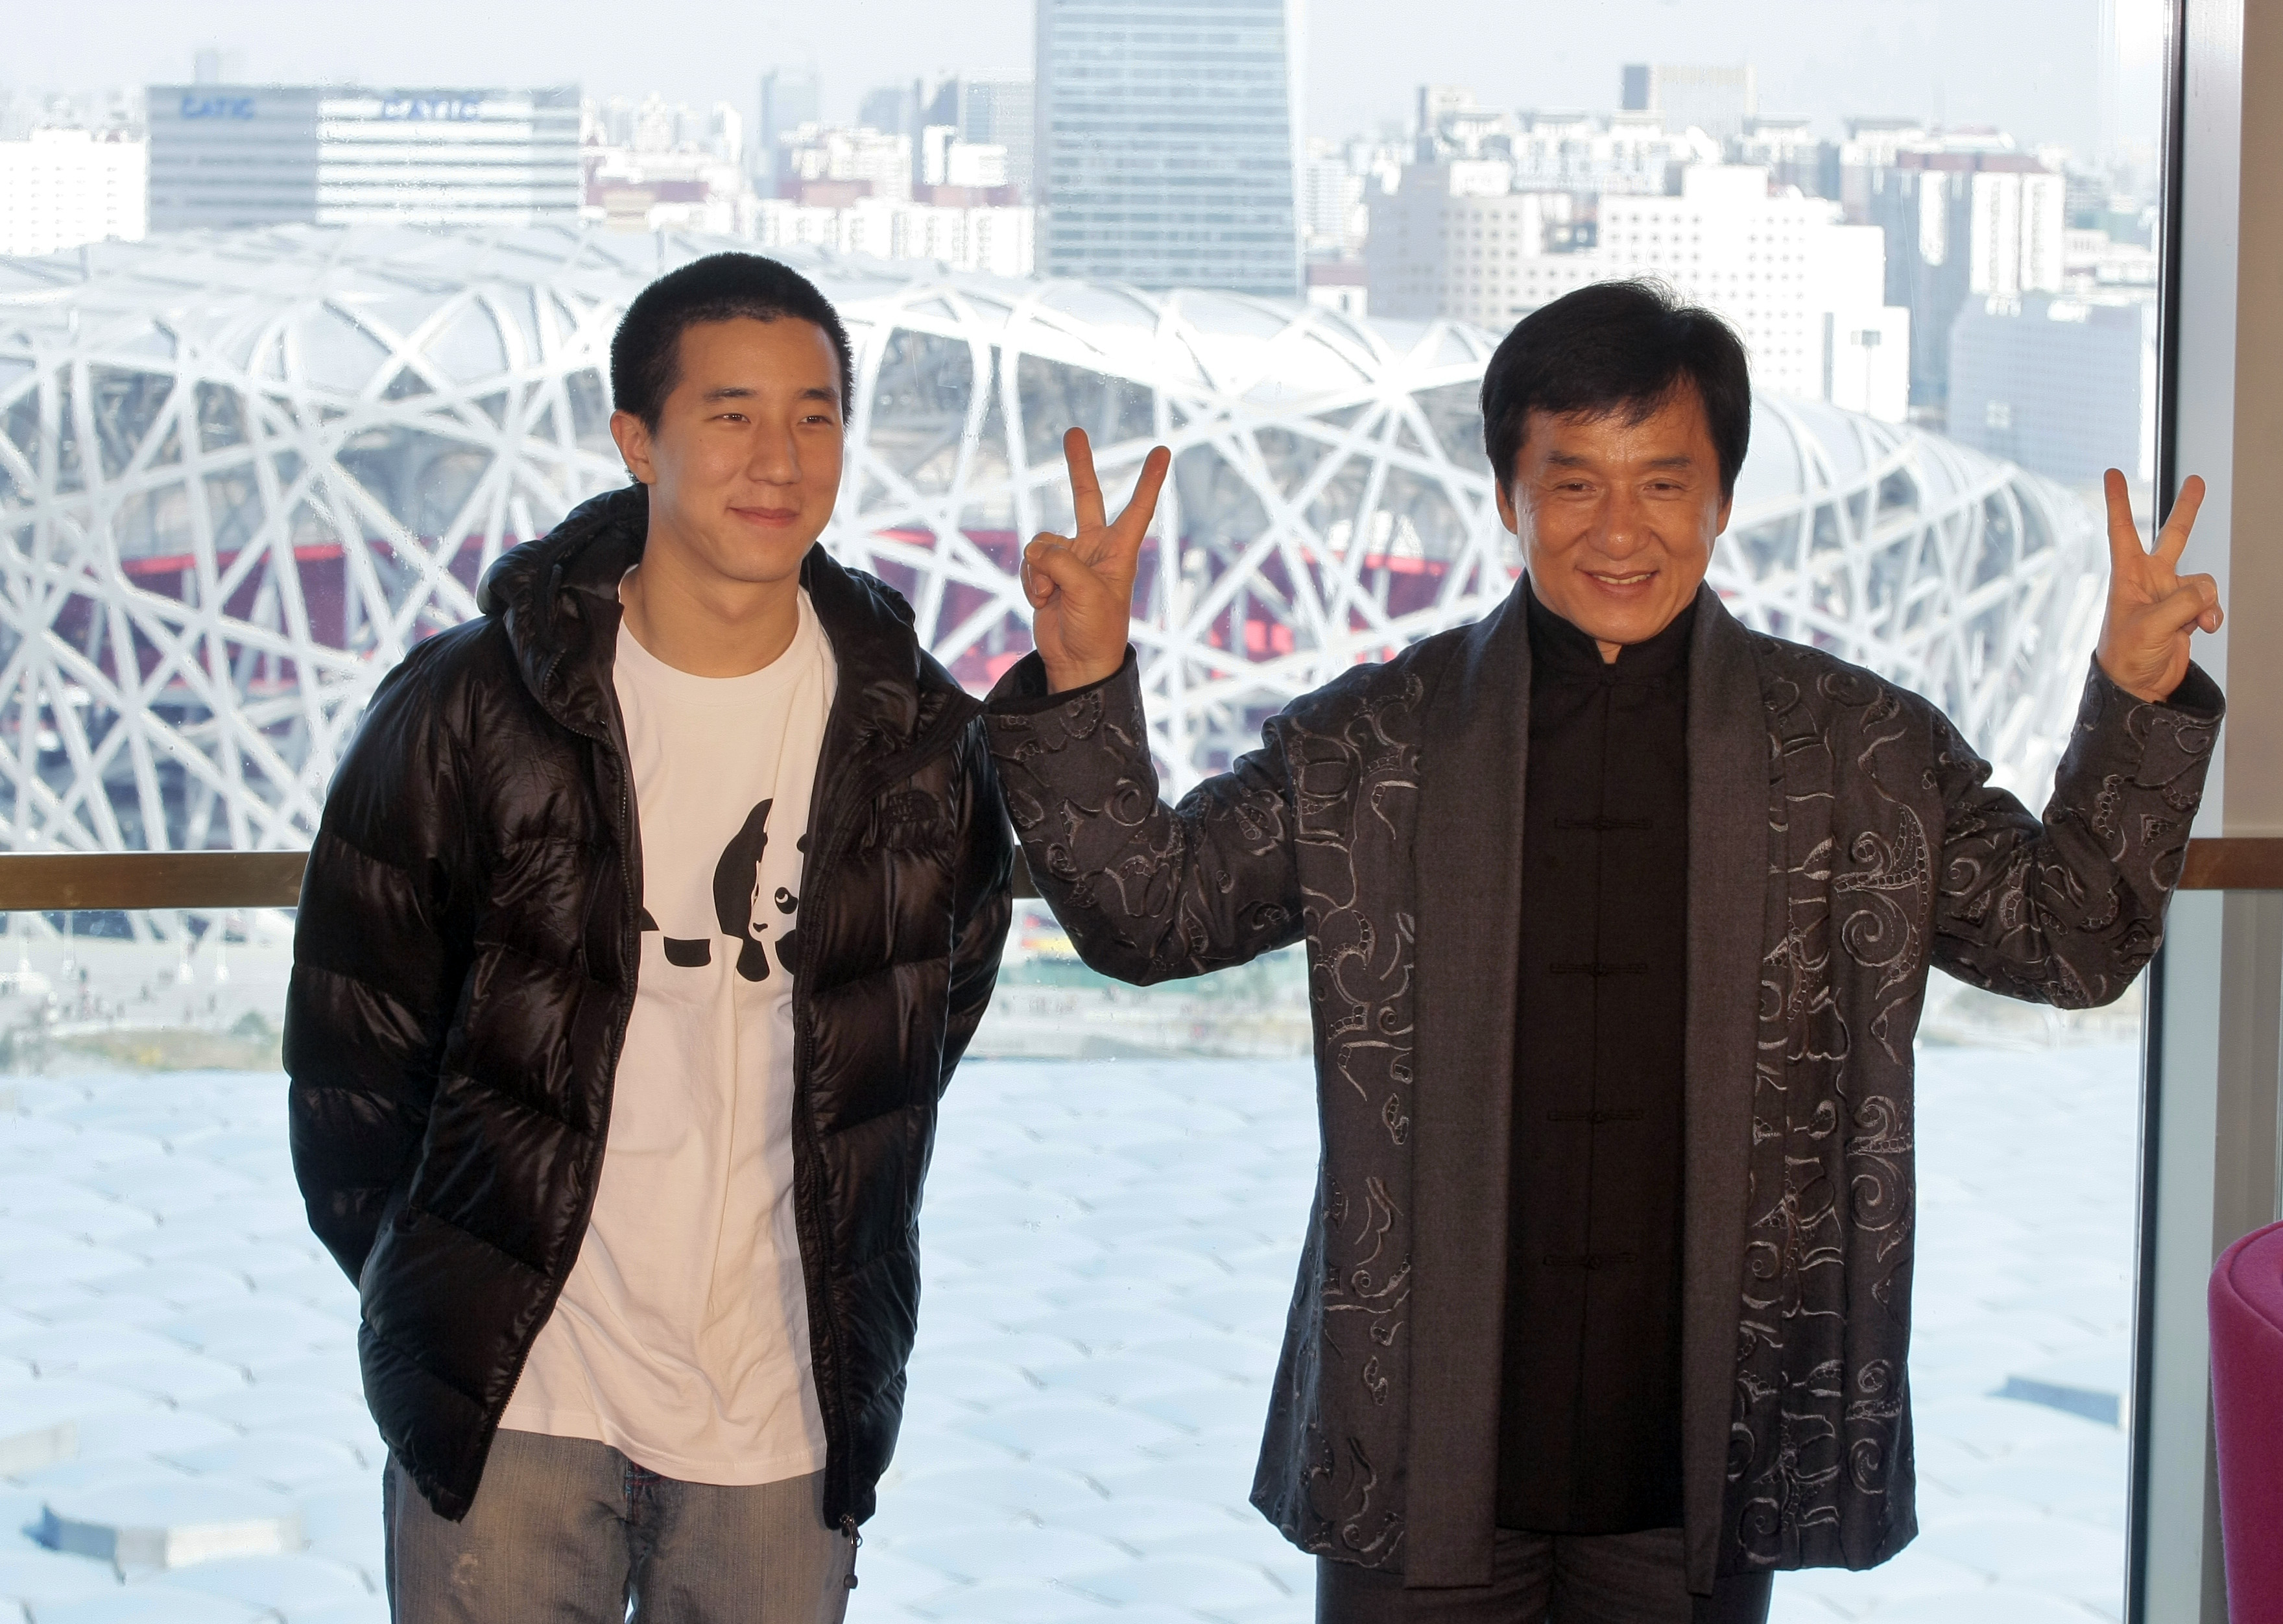 Jackie Chan and his son Jaycee Chan attend a press conference on April 1, 2009 in Beijing, China. (ChinaFotoPress/ChinaFotoPress via Getty Images)